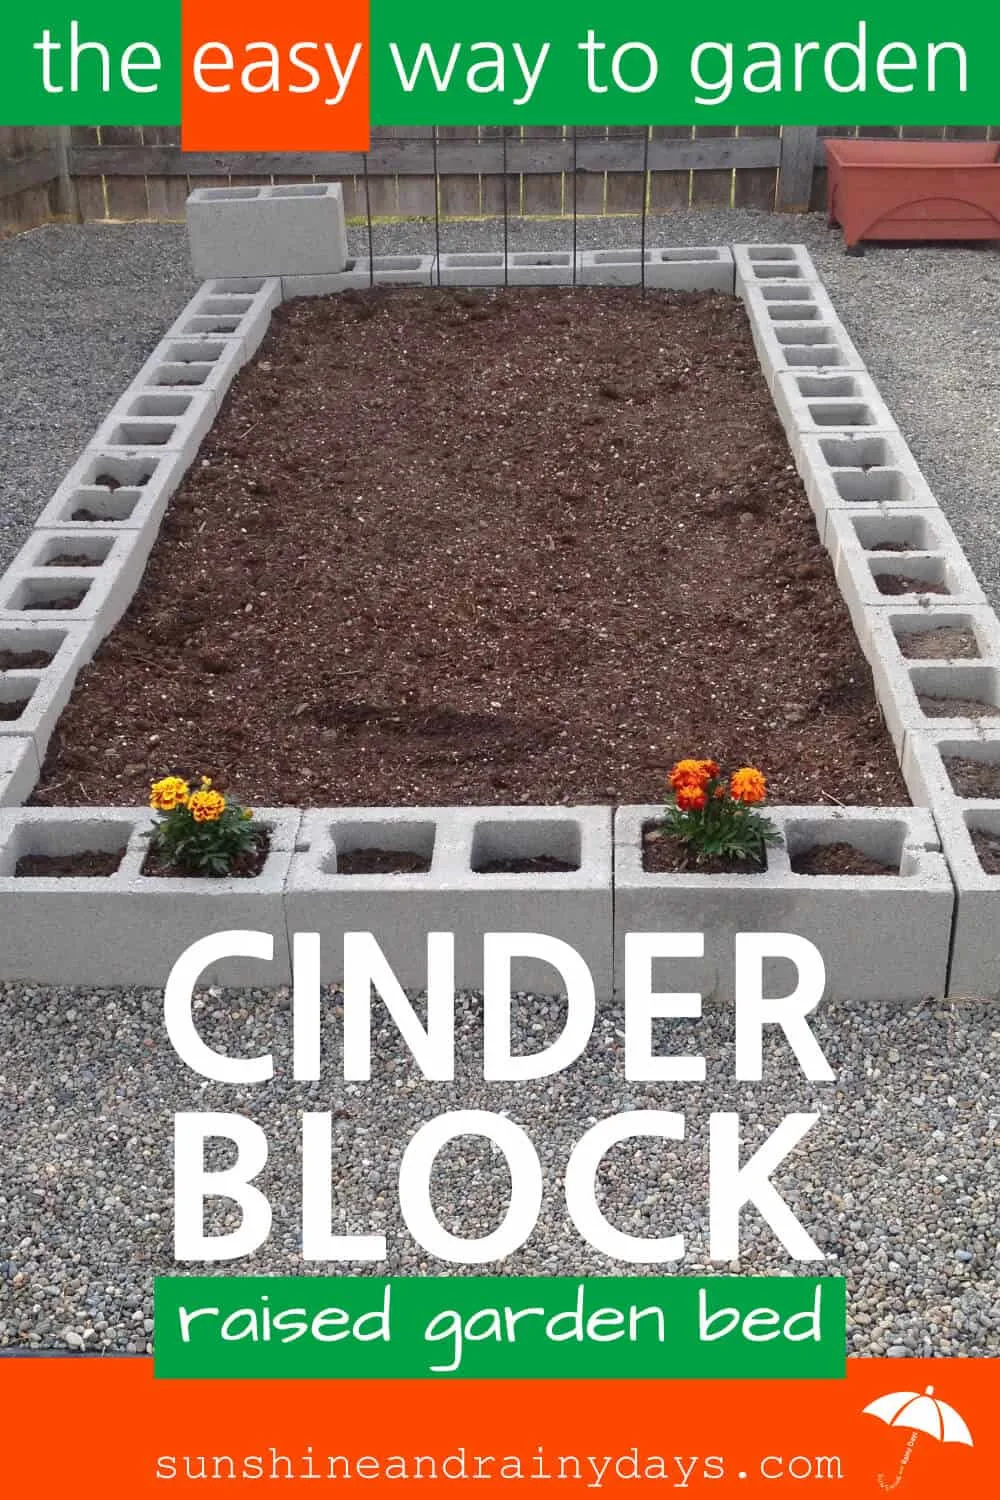 There's nothing like growing your own food! A Cinder Block Raised Garden Bed is easy to build and will give you years of use! Need a tomato? Go pick one! Green beans for dinner? You got that too! Cinder Block Raised Garden Bed | Cinder Block Garden | Raised Garden Beds | #raisedgardenbeds #raisedgarden #cinderblocks #SARD